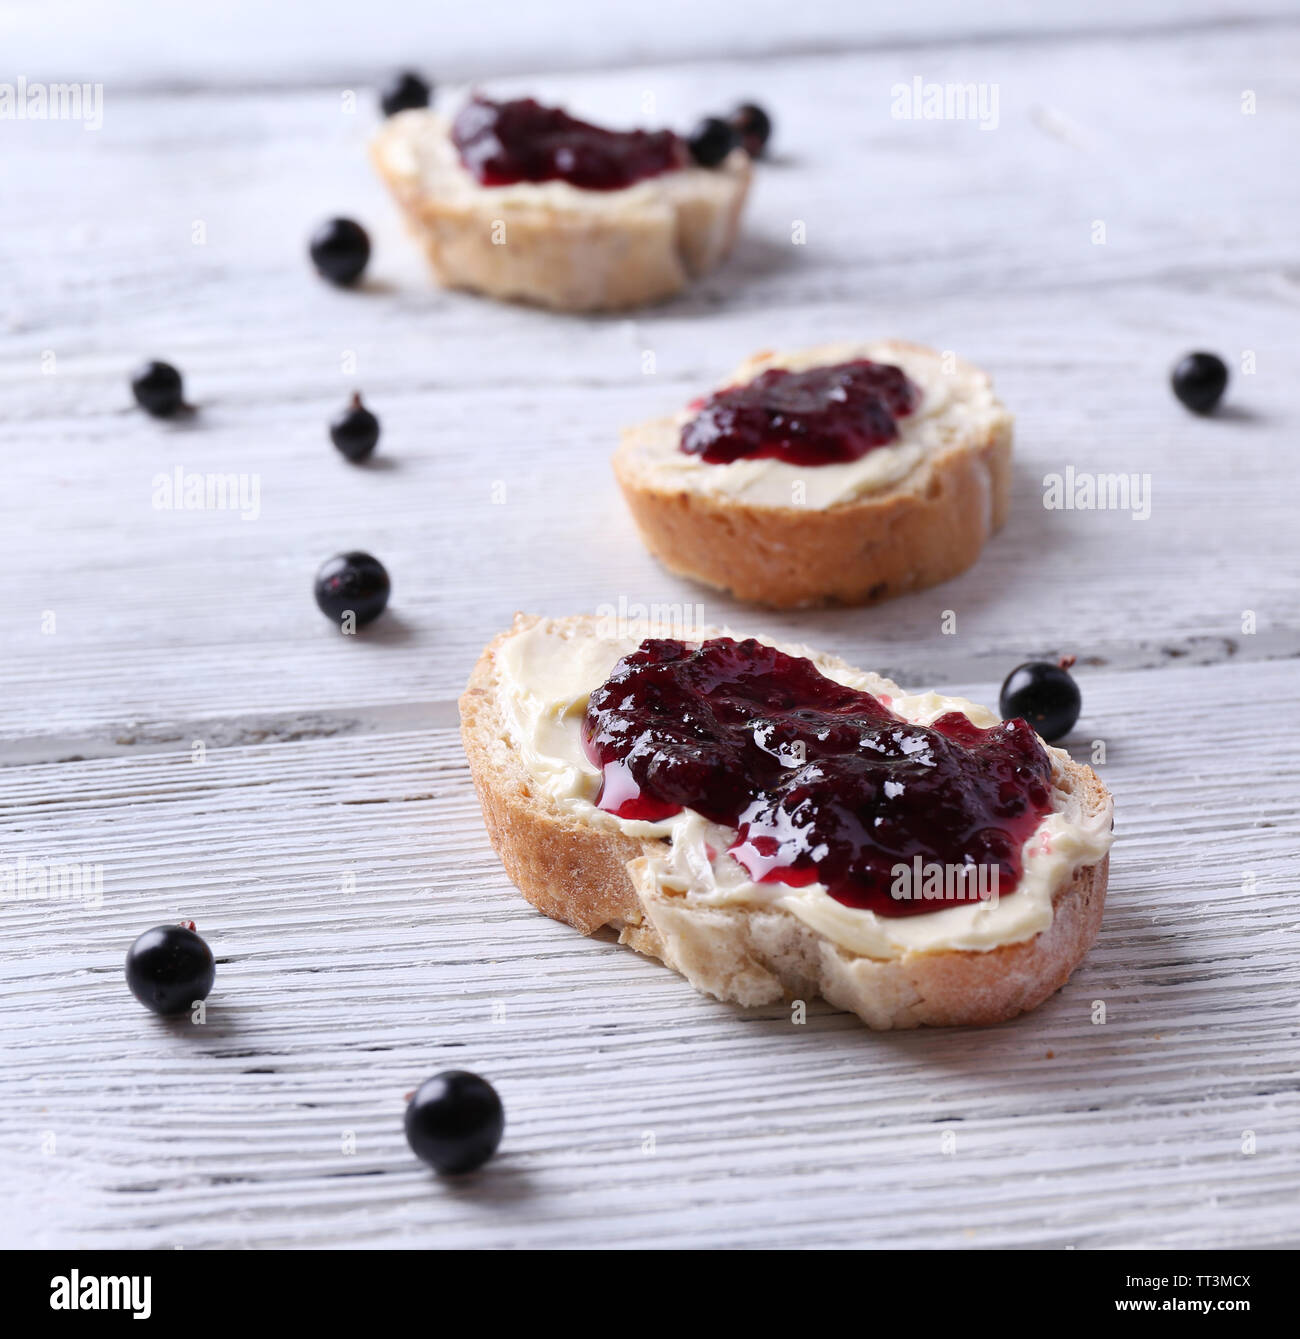 Fresh bread with homemade butter and blackcurrant jam on wooden background Stock Photo